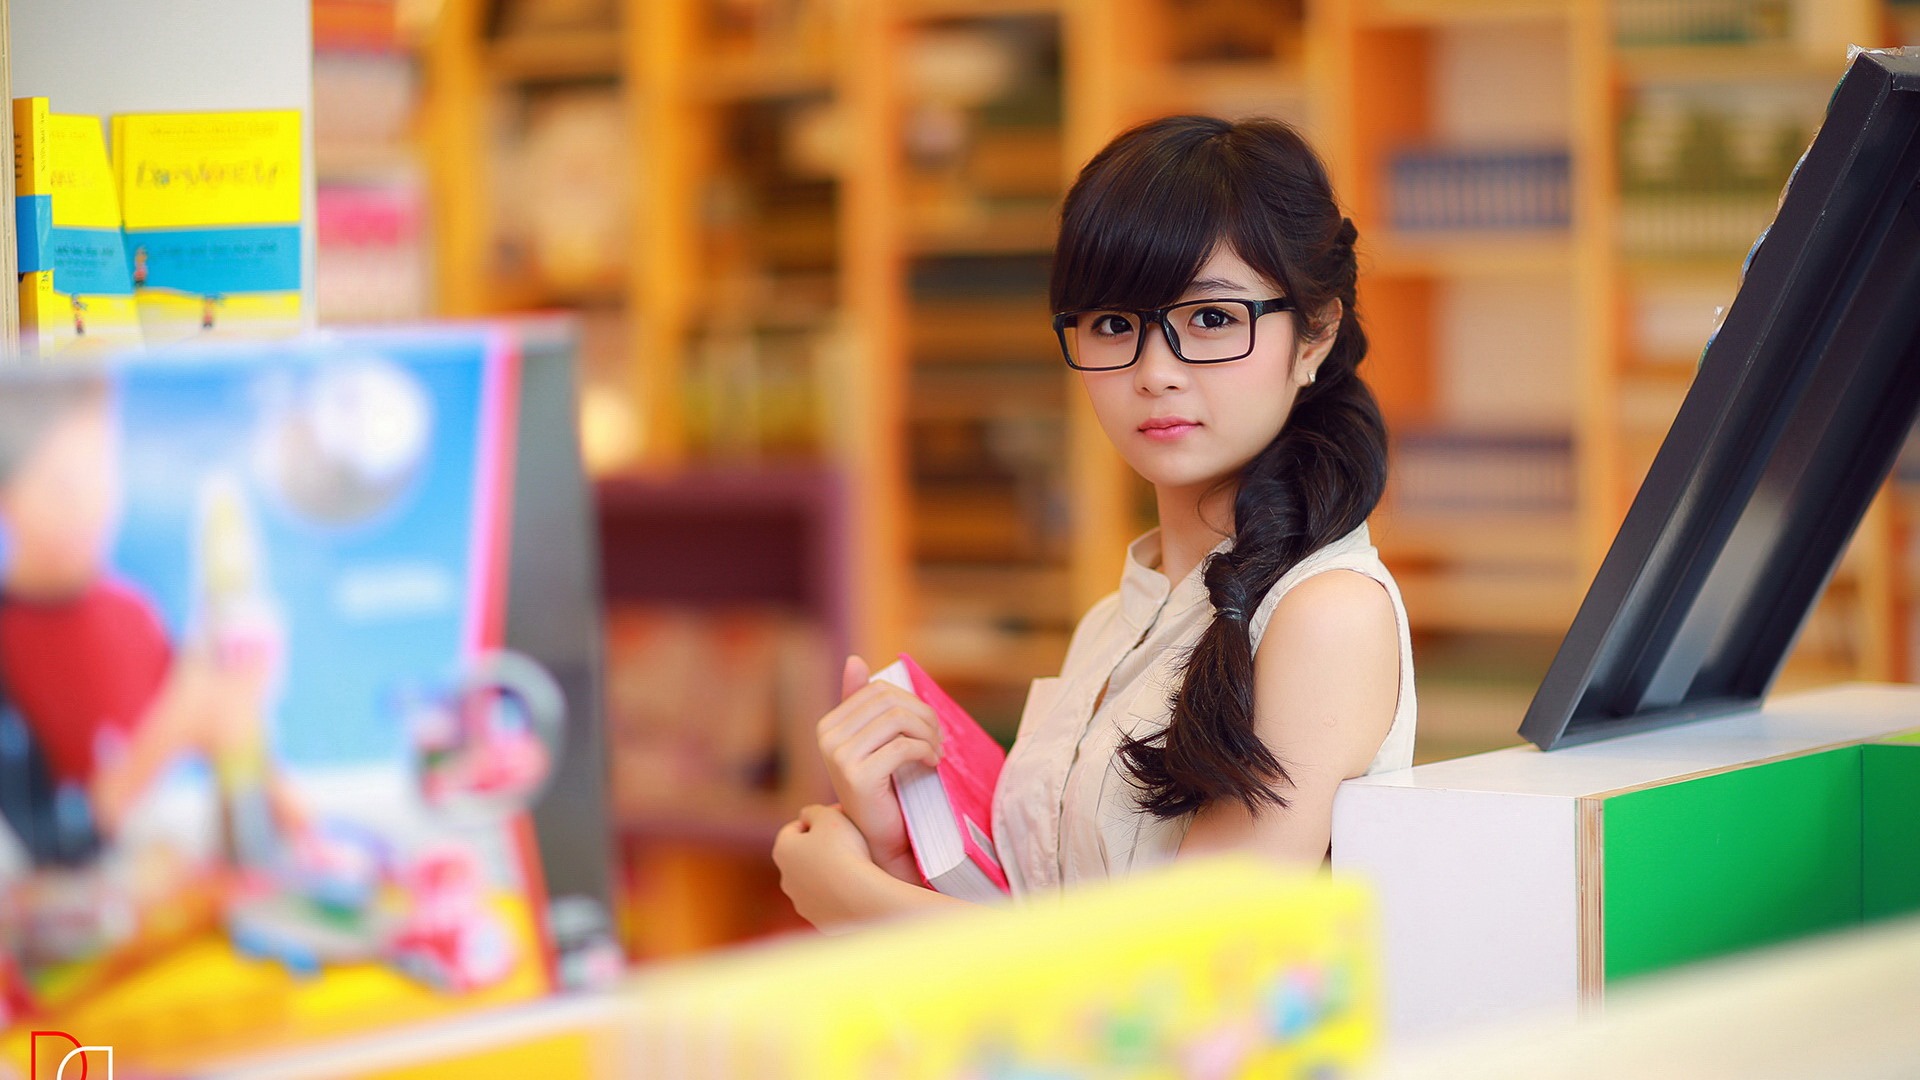 Pure and lovely young Asian girl HD wallpapers collection (3) #25 - 1920x1080